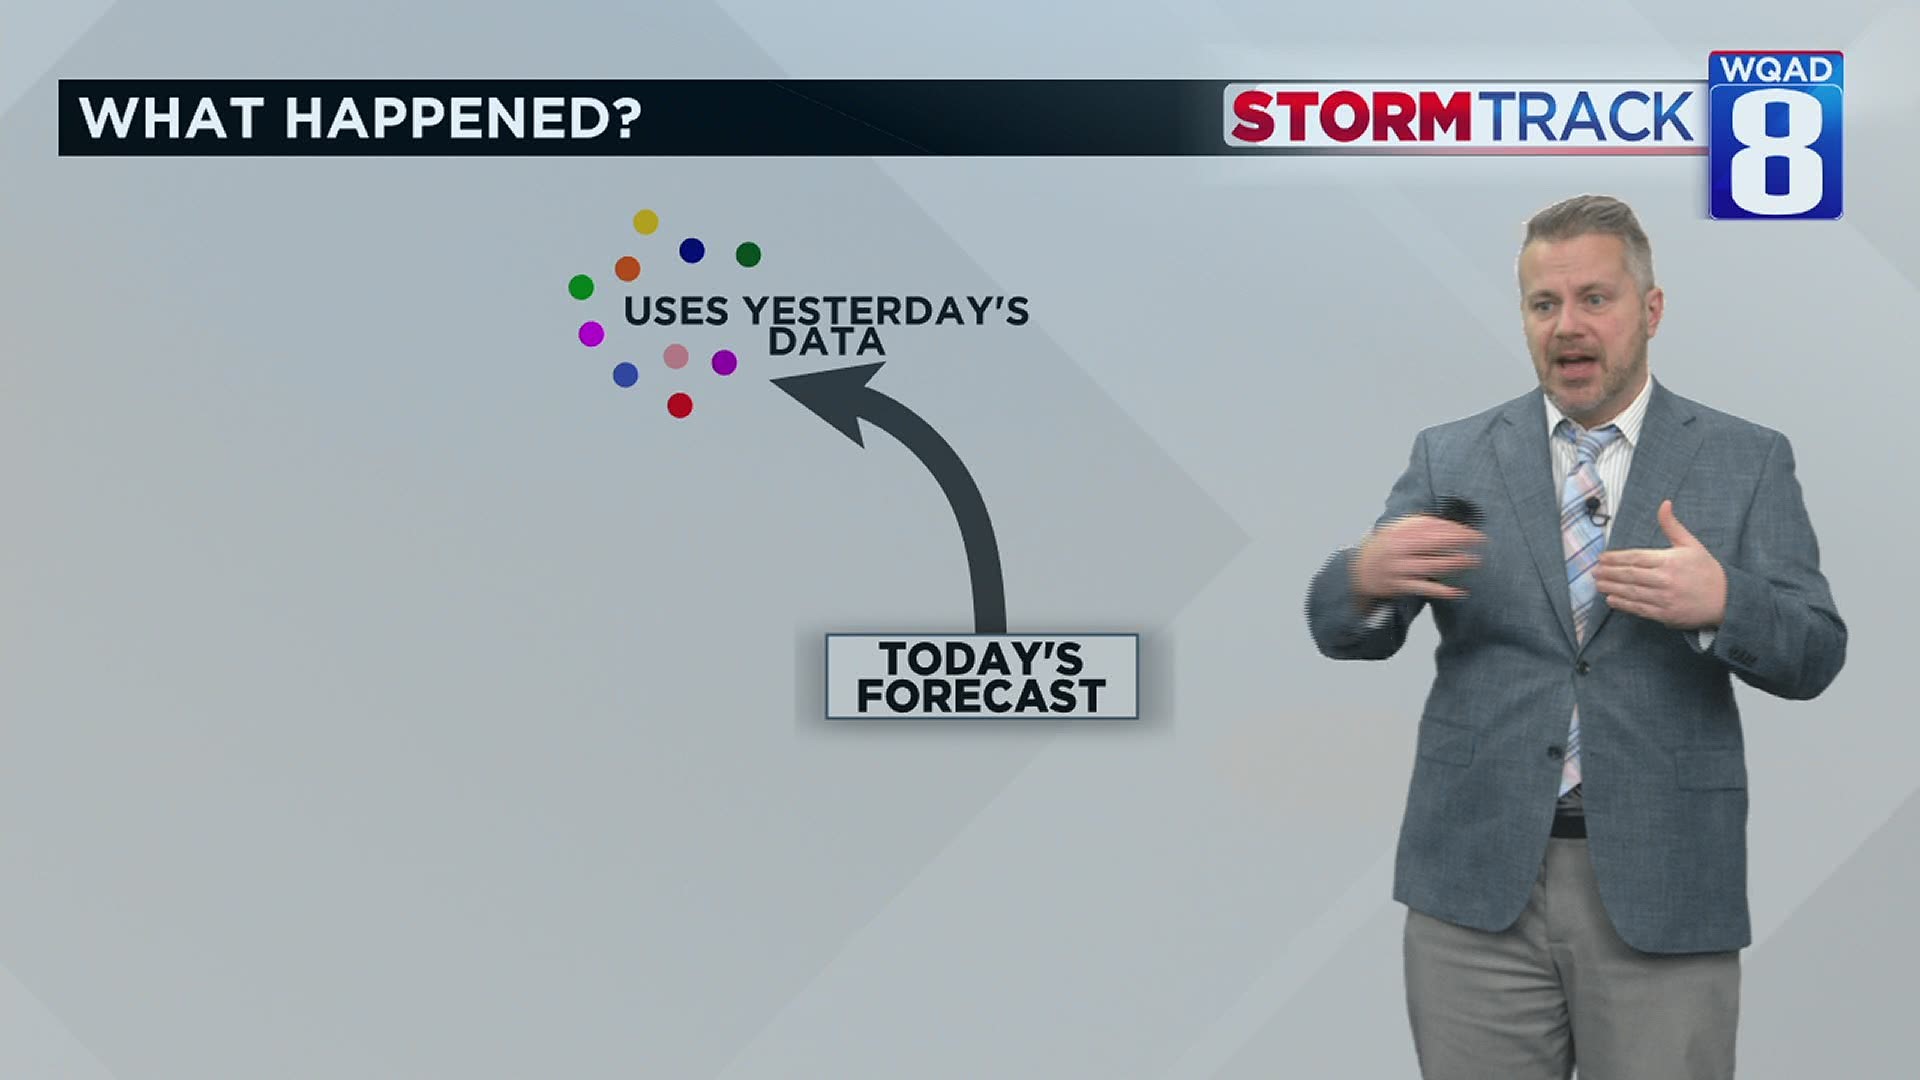 Eric explains why yesterday's 6-12 inch snow forecast turned to a dusting today.